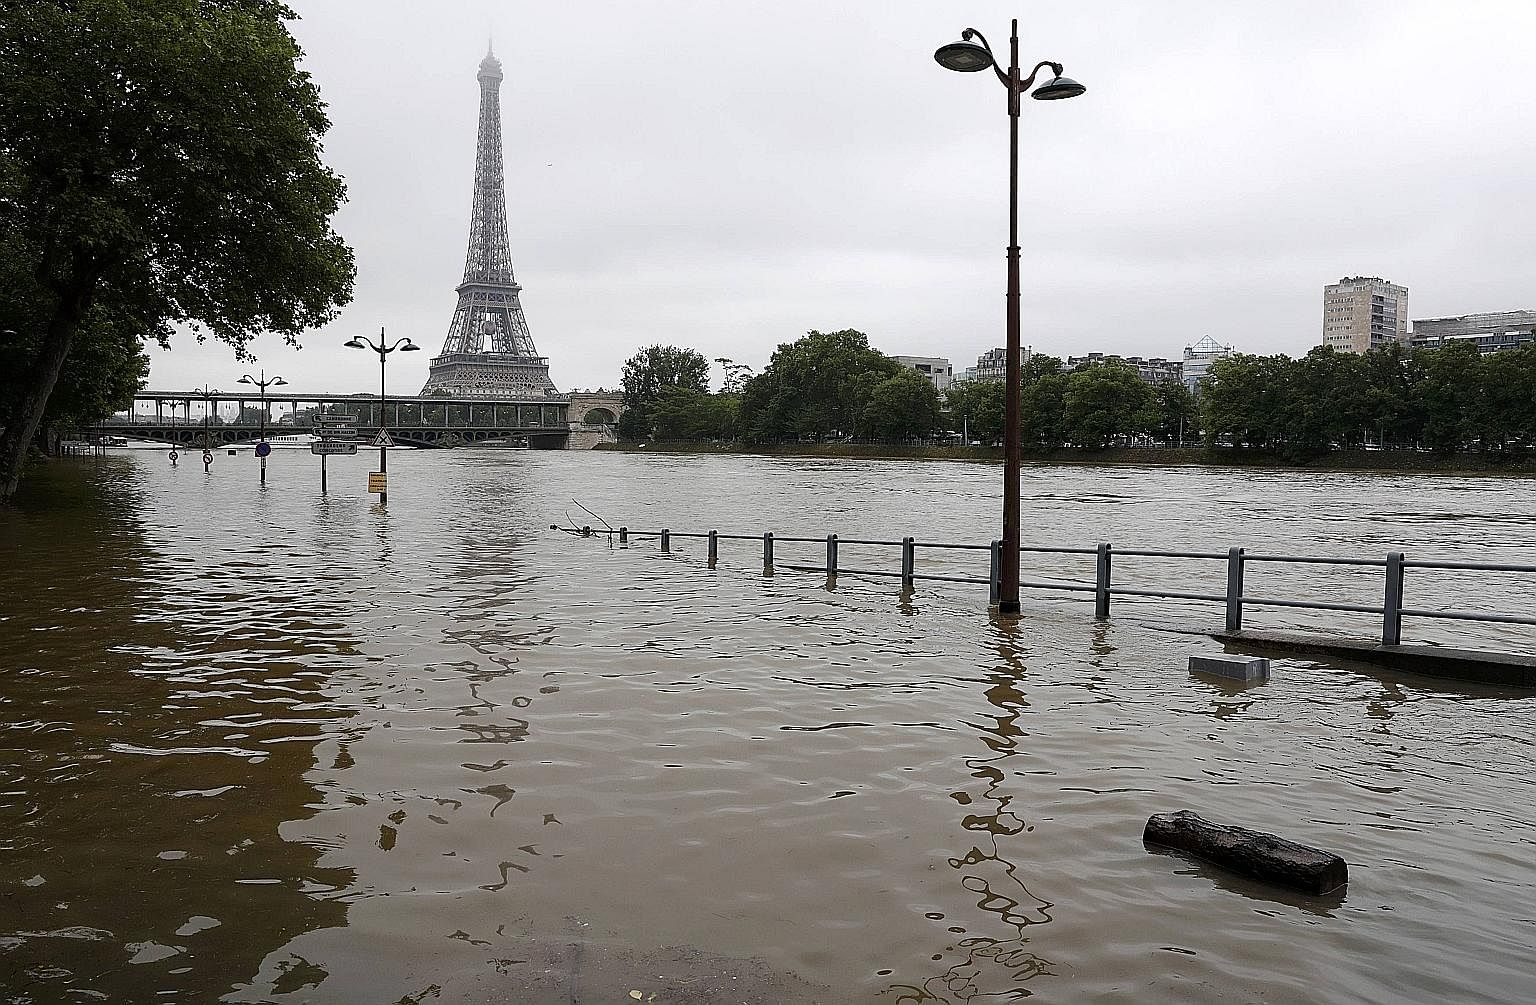 14 dead as floods cause havoc across Europe, Europe News &amp; Top Stories - The Straits Times. death